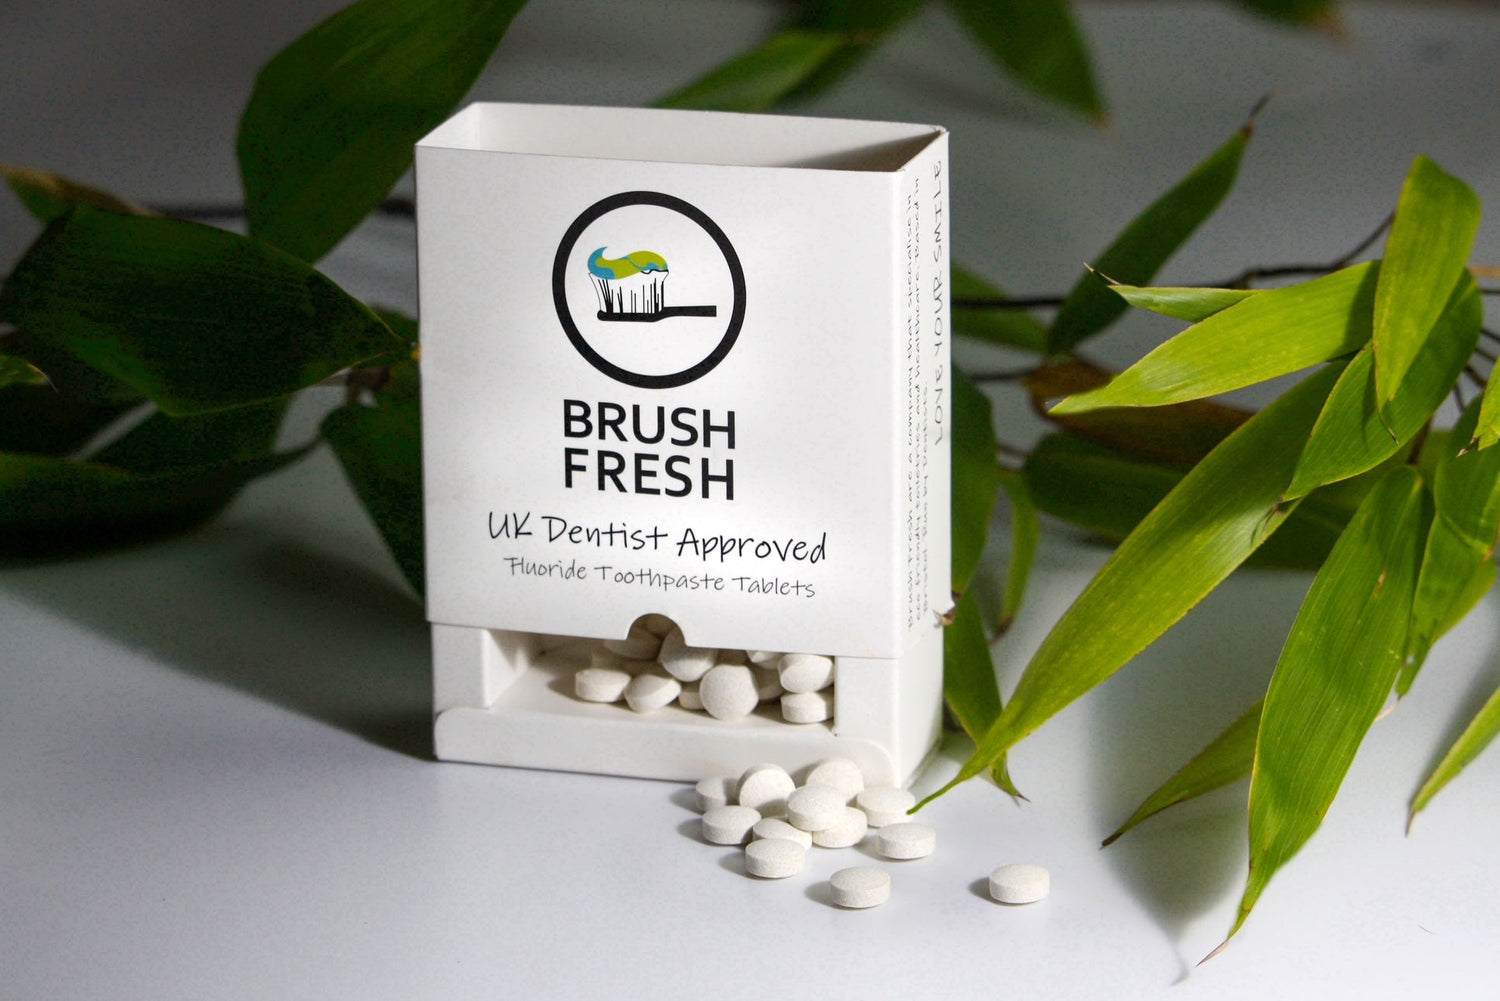 brush fresh toothpaste tablets